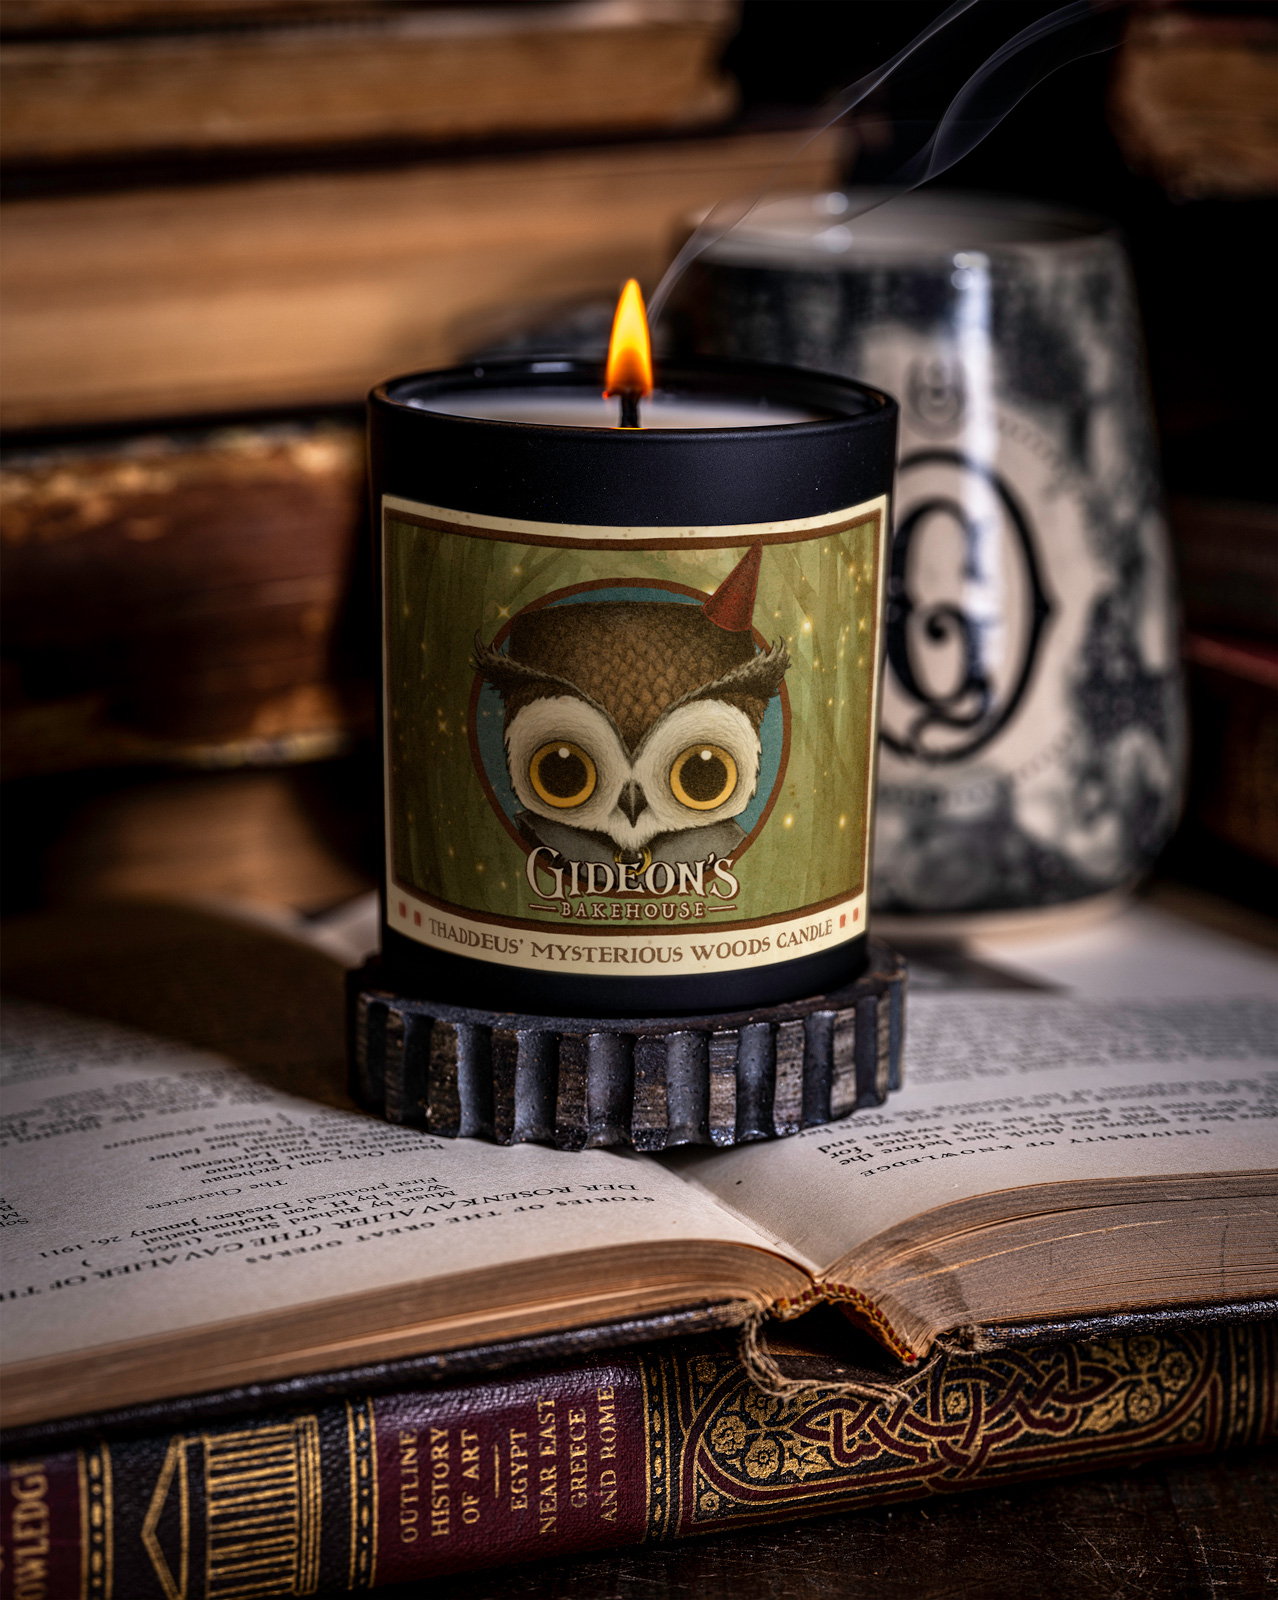 Thaddeus' Mysterious Woods Candle!